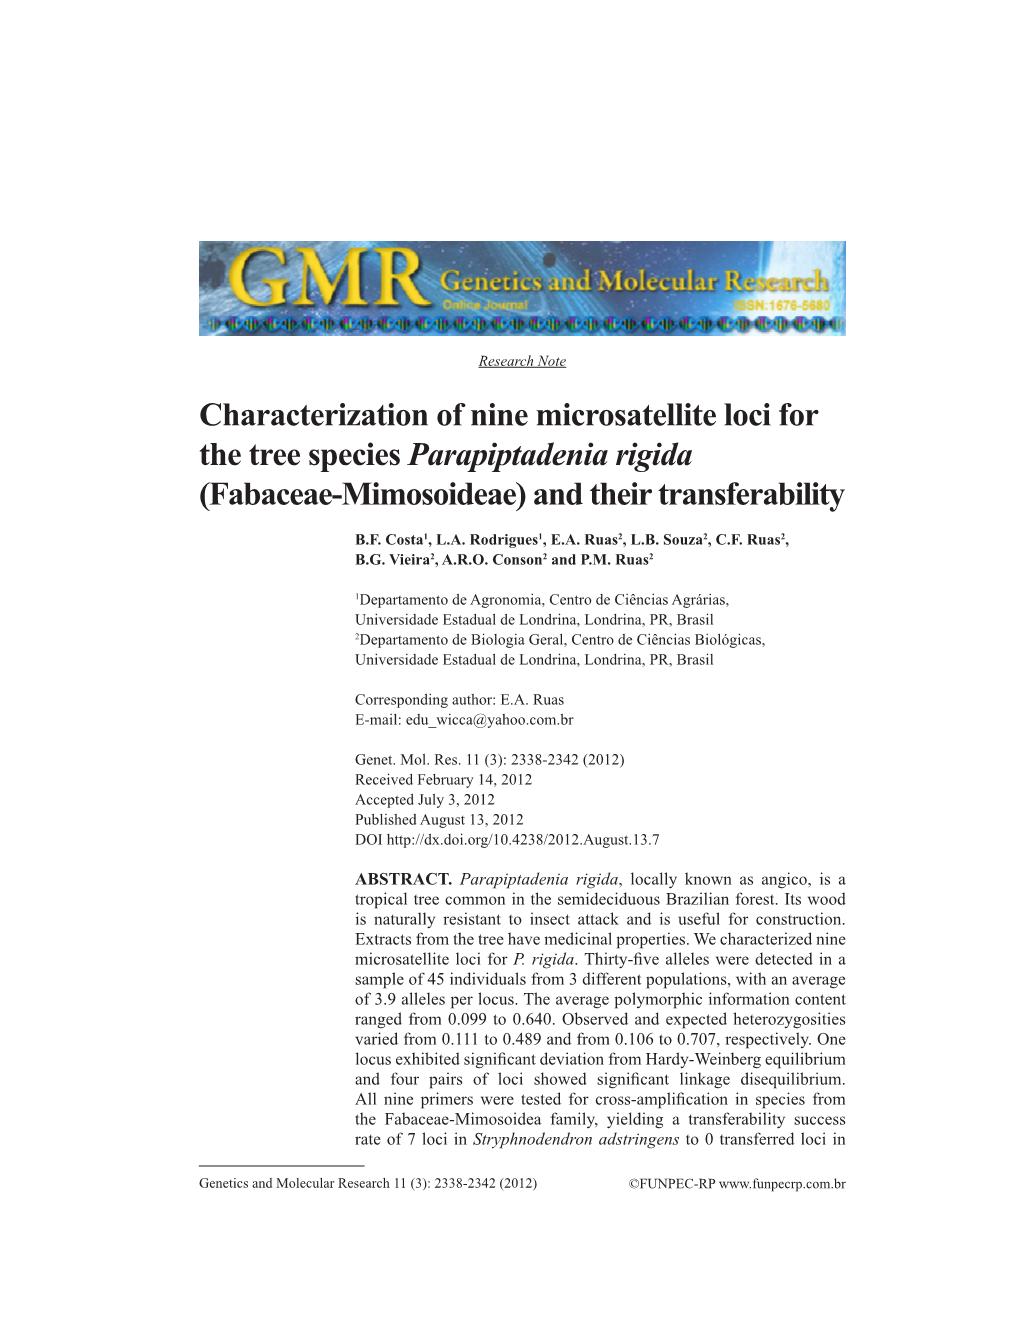 Characterization of Nine Microsatellite Loci for the Tree Species Parapiptadenia Rigida (Fabaceae-Mimosoideae) and Their Transferability